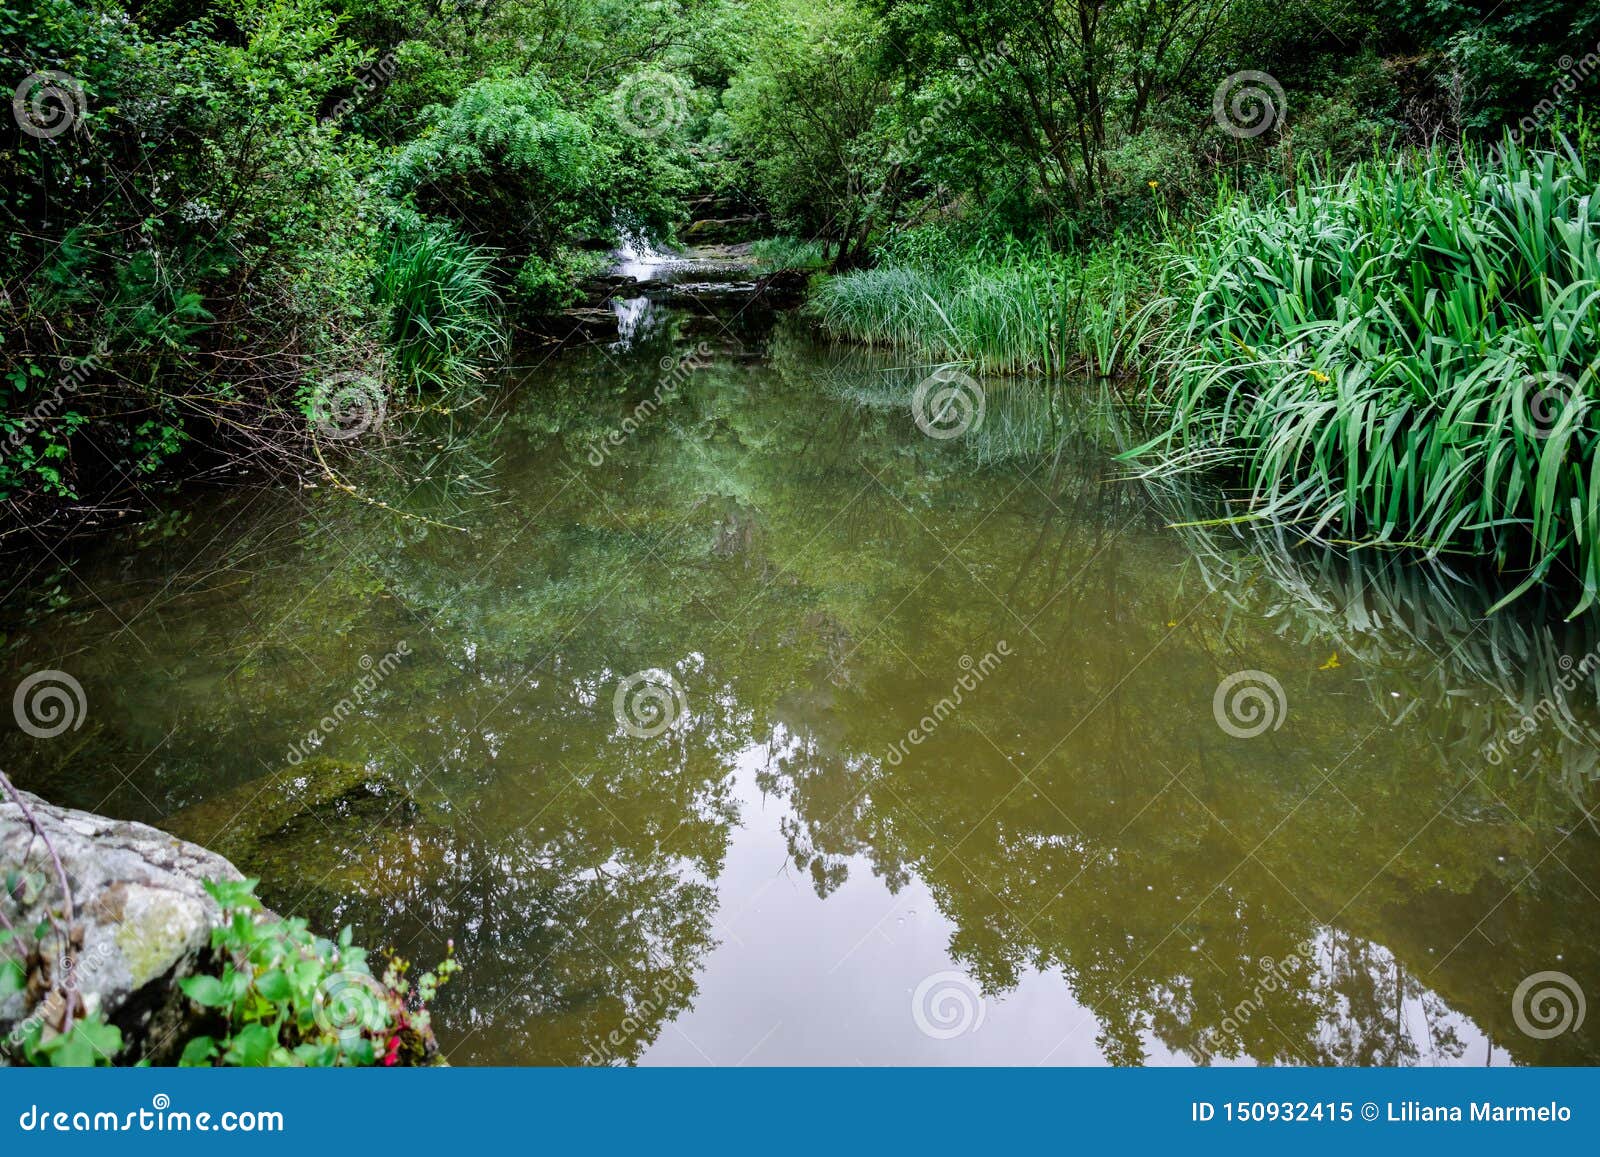 green landscape with waterfall and reflection in the river mourÃÂ£o, anÃÂ§os - sintra, portugal